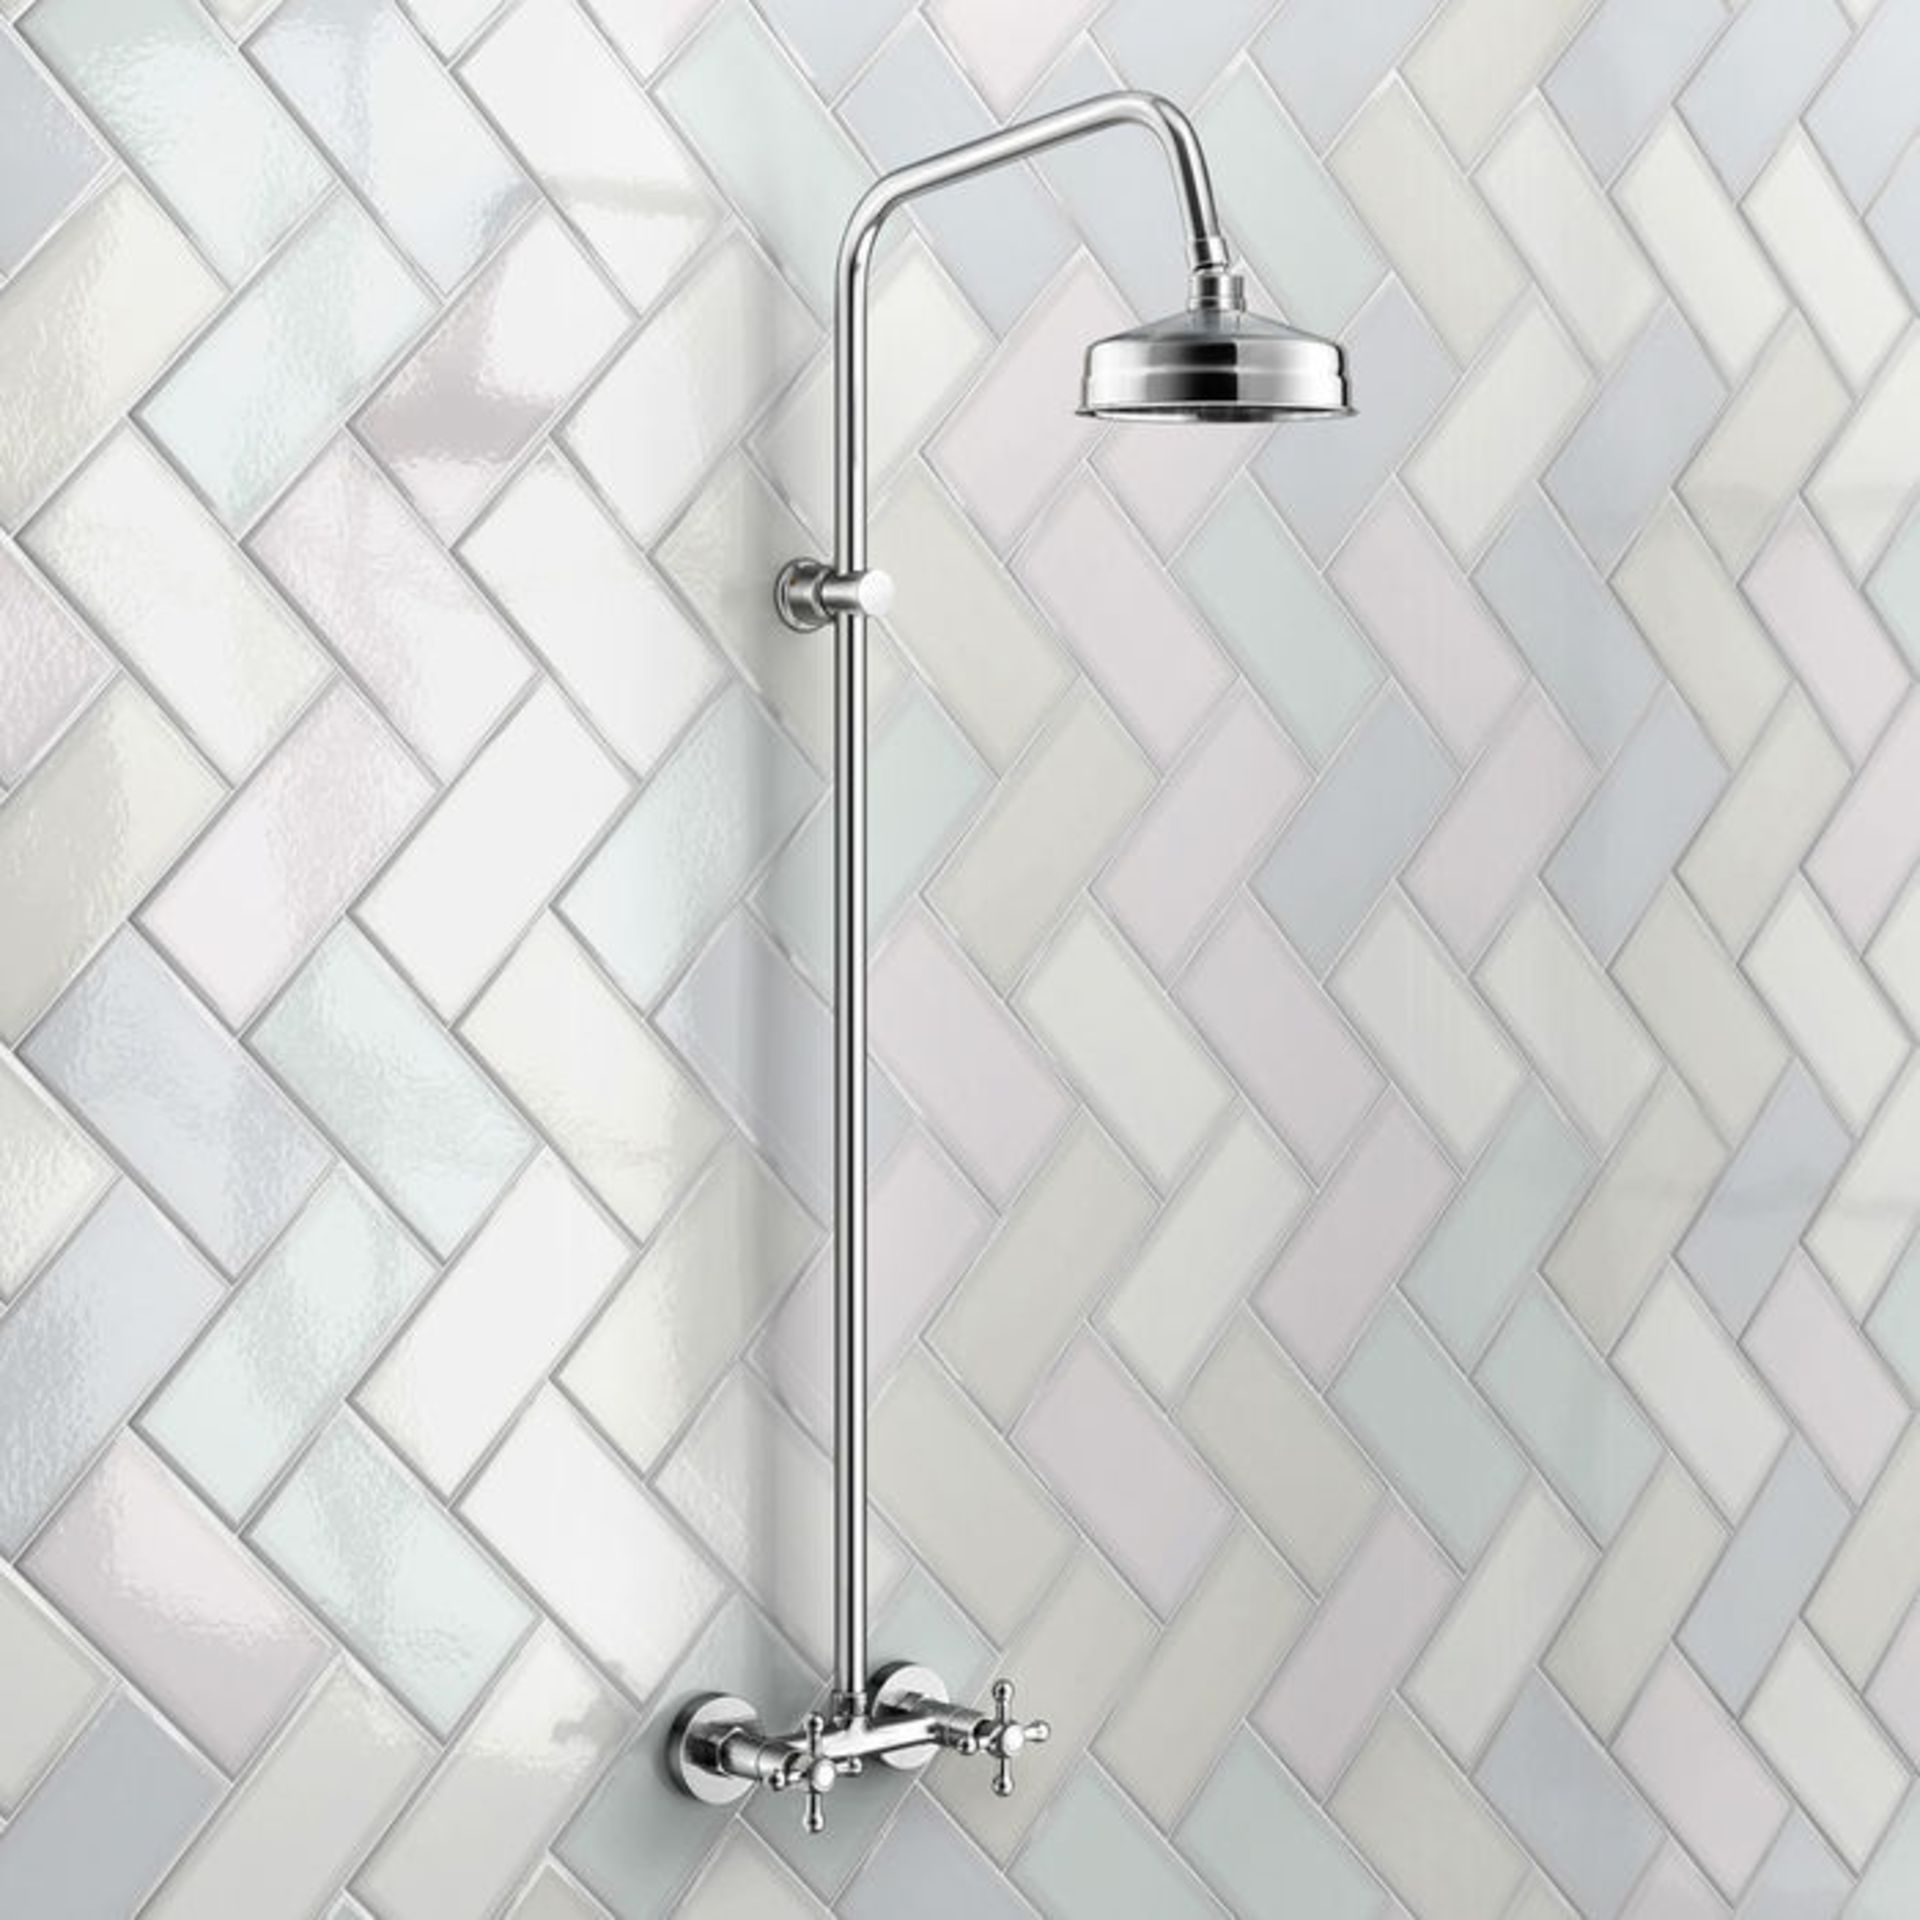 (SM7) Traditional Exposed Shower & Medium Head.Exposed design makes for a statement piece Stunning - Image 3 of 3